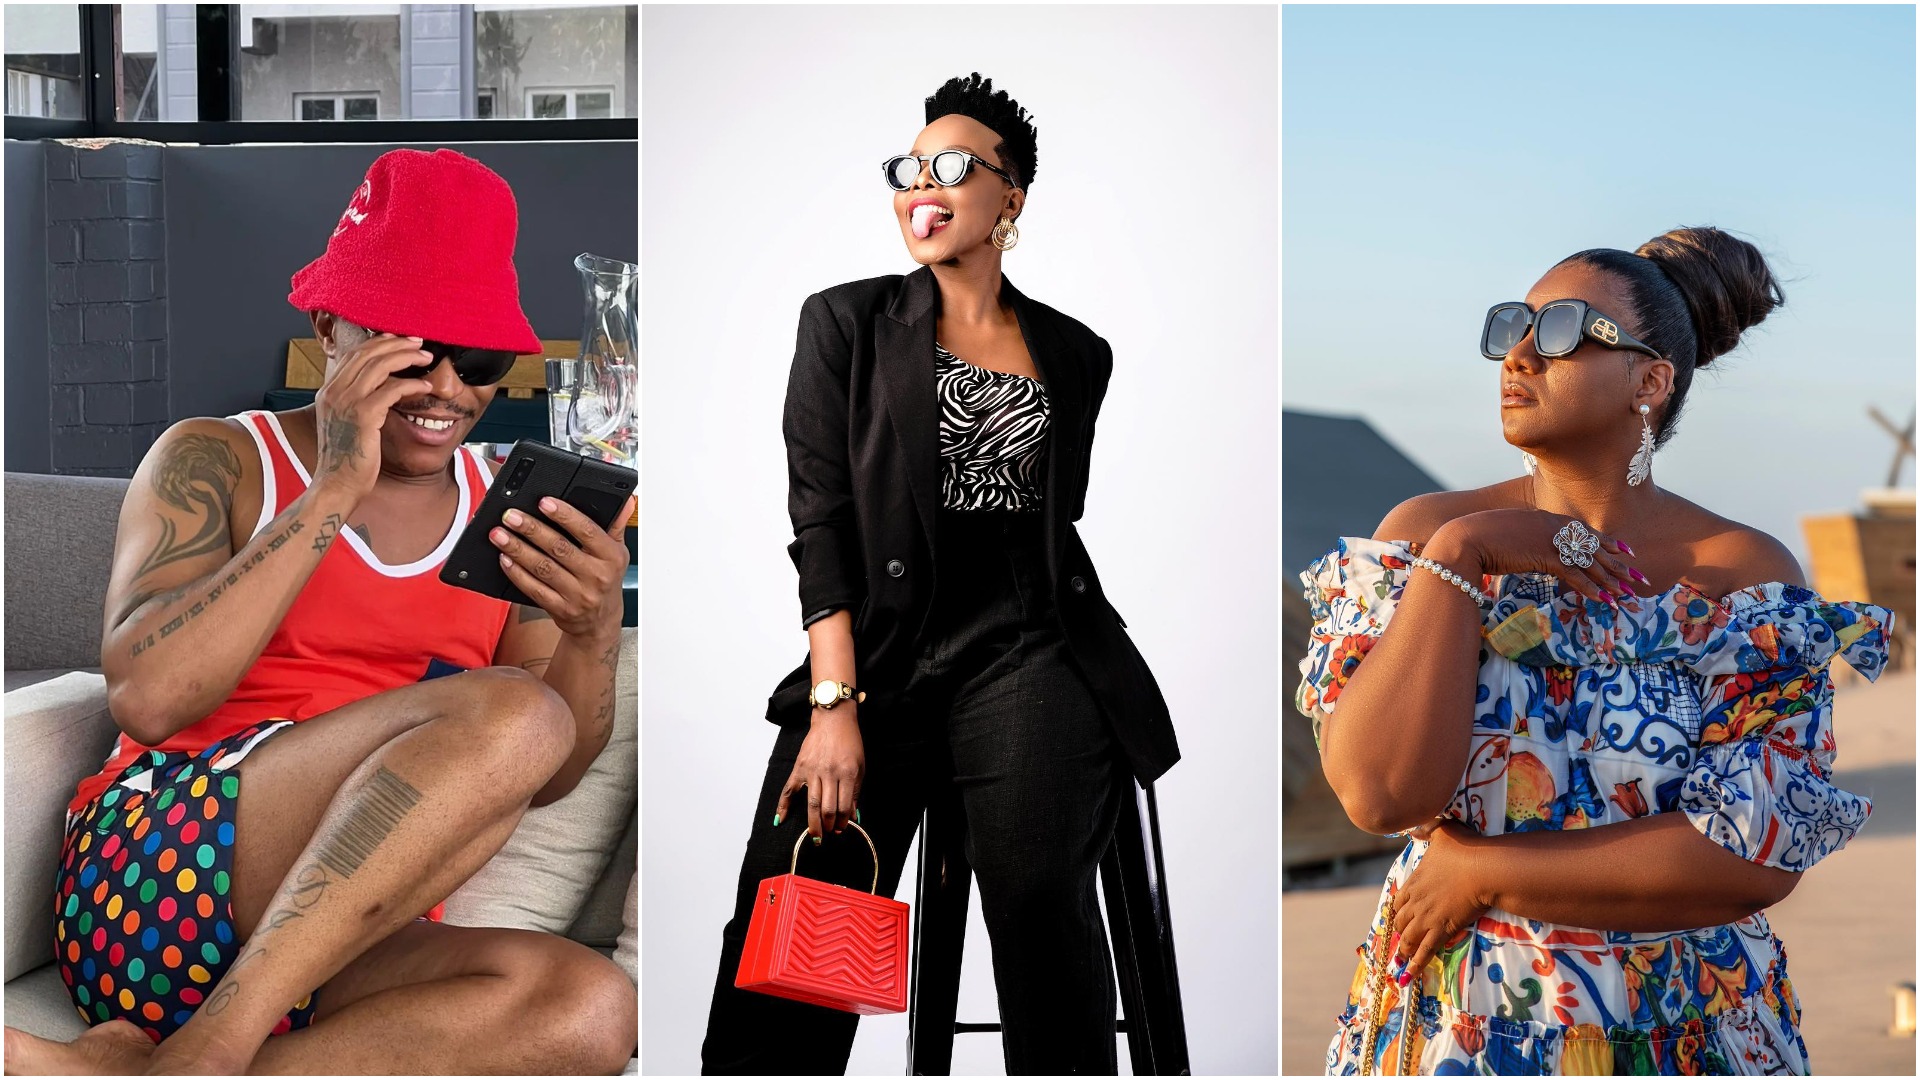 List of SA Celebrities Who Have Been Hacked In The Last 2 Weeks As Scammers Prey On Rich & Famous